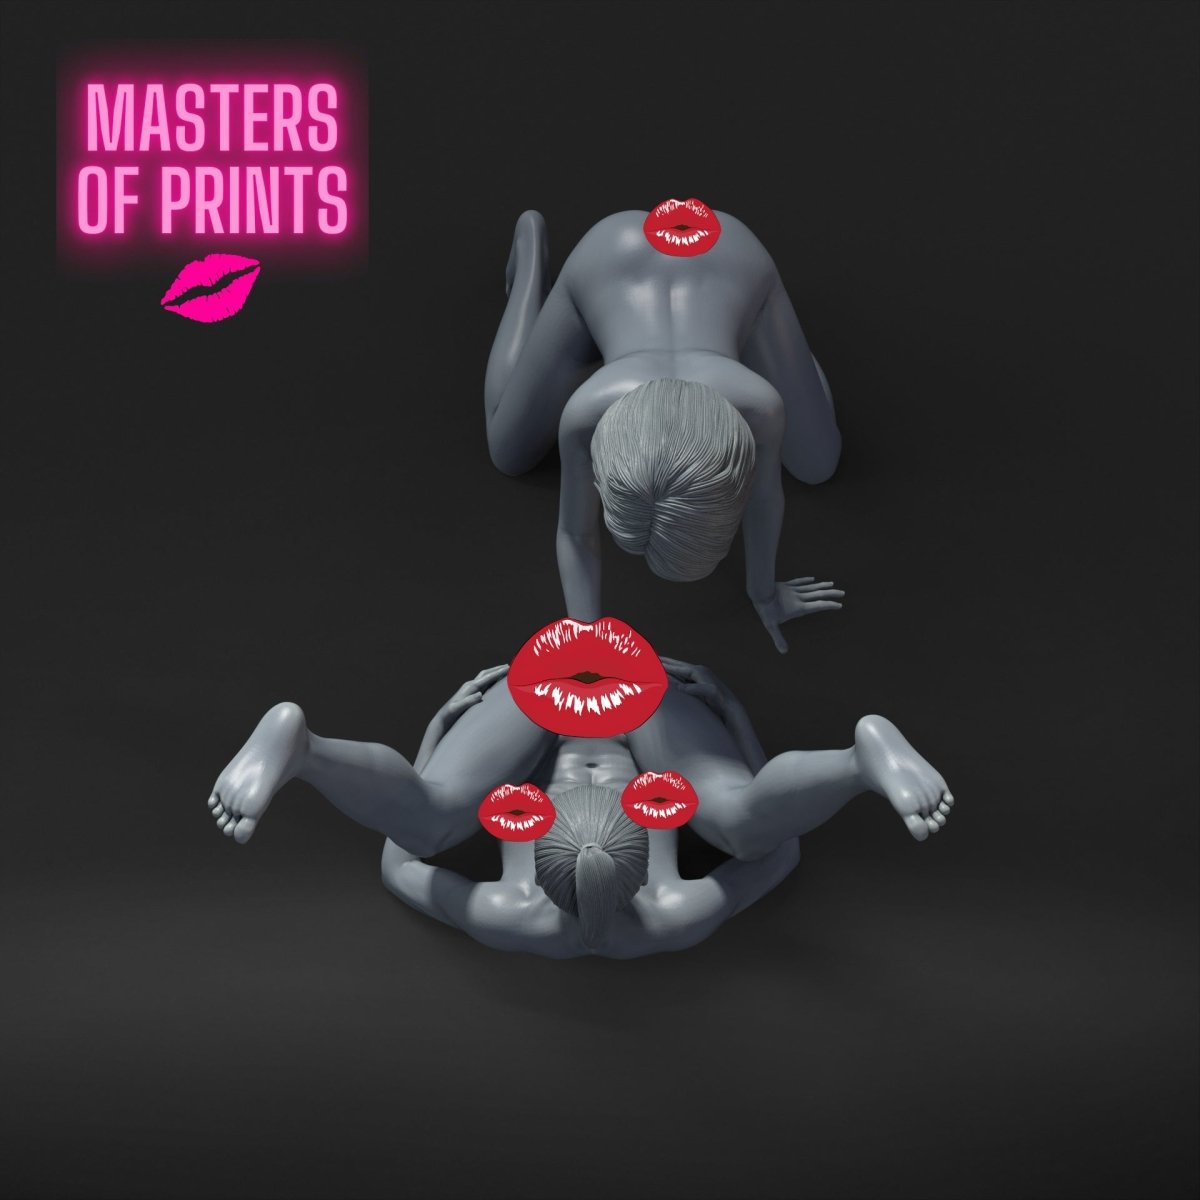 Lesbians 31 Mature 3d Printed miniature FanArt by Masters Of Prints Collectables Statues & Figurines